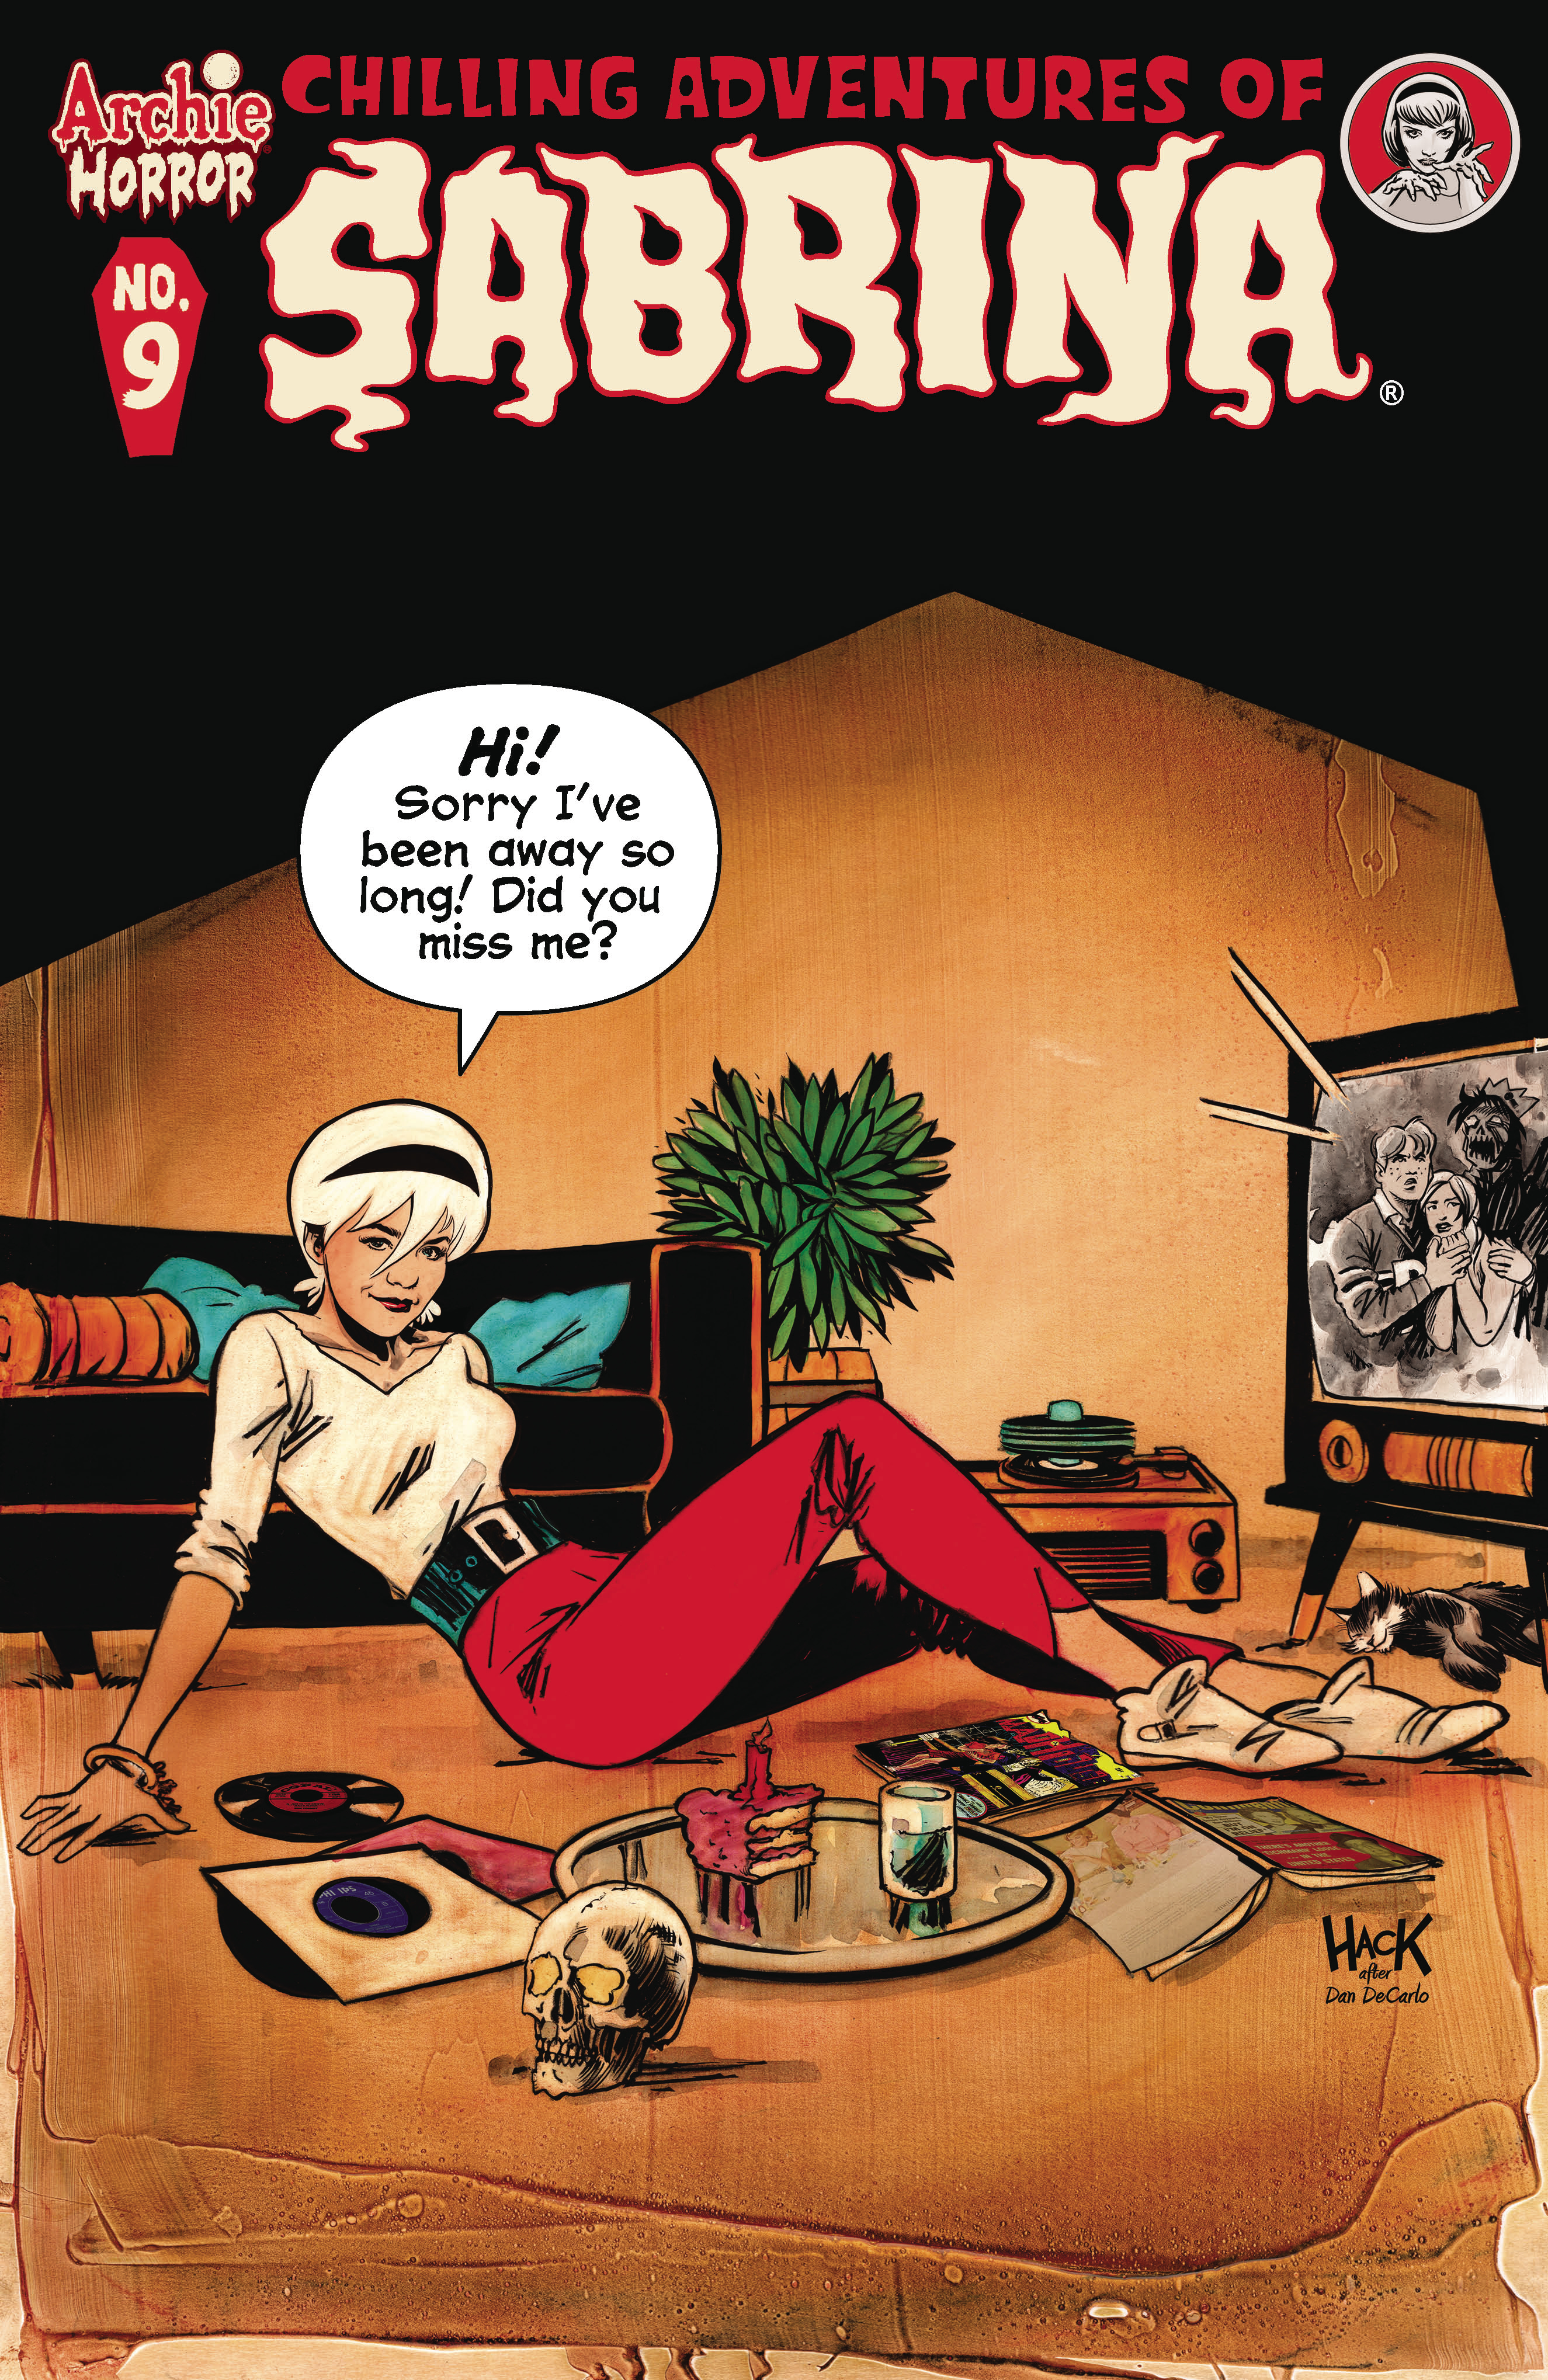 Chilling Adventure of Sabrina #9 Cover A Hack (Mature)